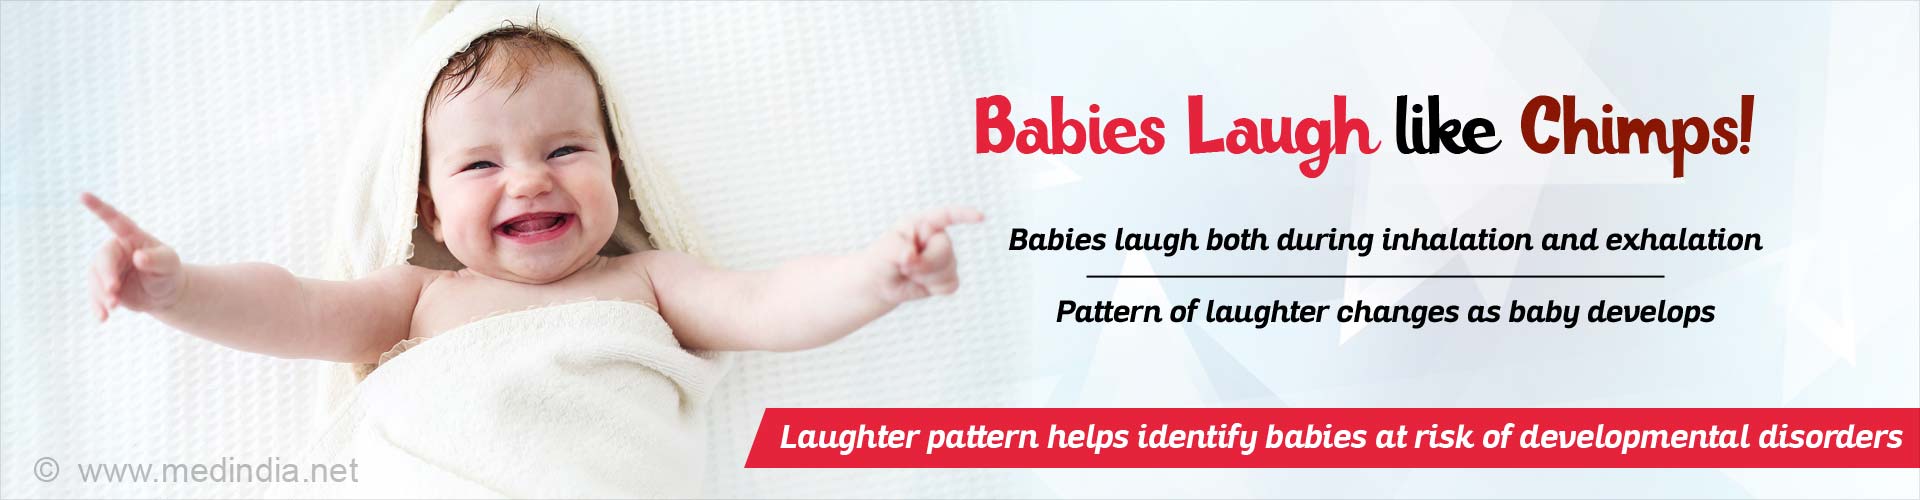 Babies Laugh like Chimps. Babies laugh both during inhalation and exhalation. Pattern of laughter changes as baby develops. Laughter pattern may help identify babies at risk of developmental disorders.